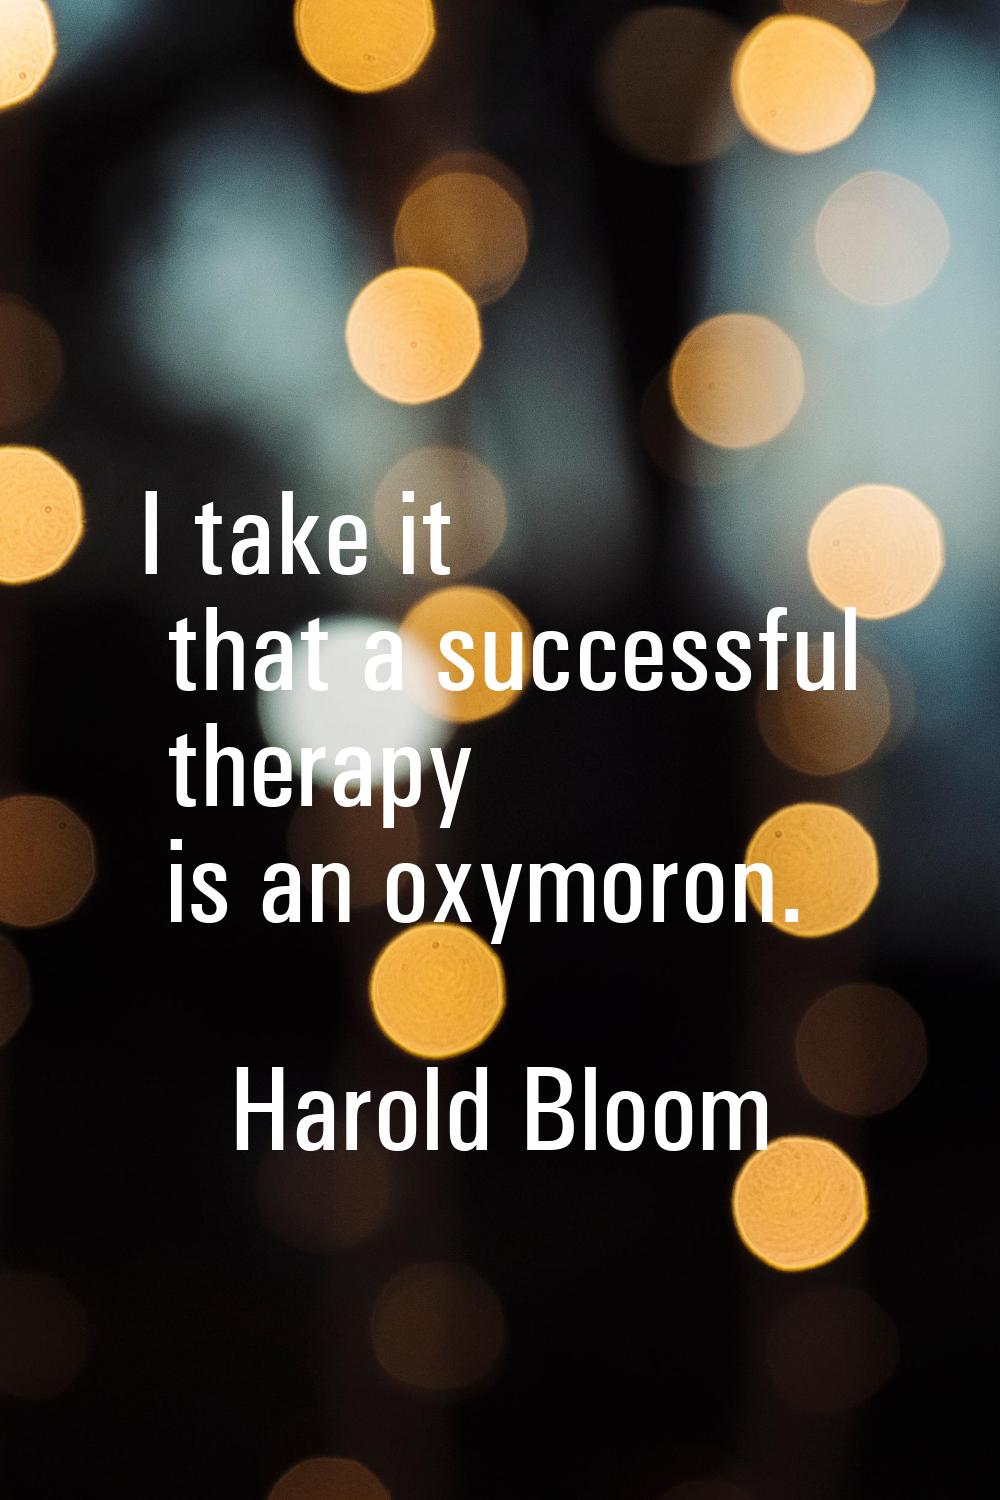 I take it that a successful therapy is an oxymoron.